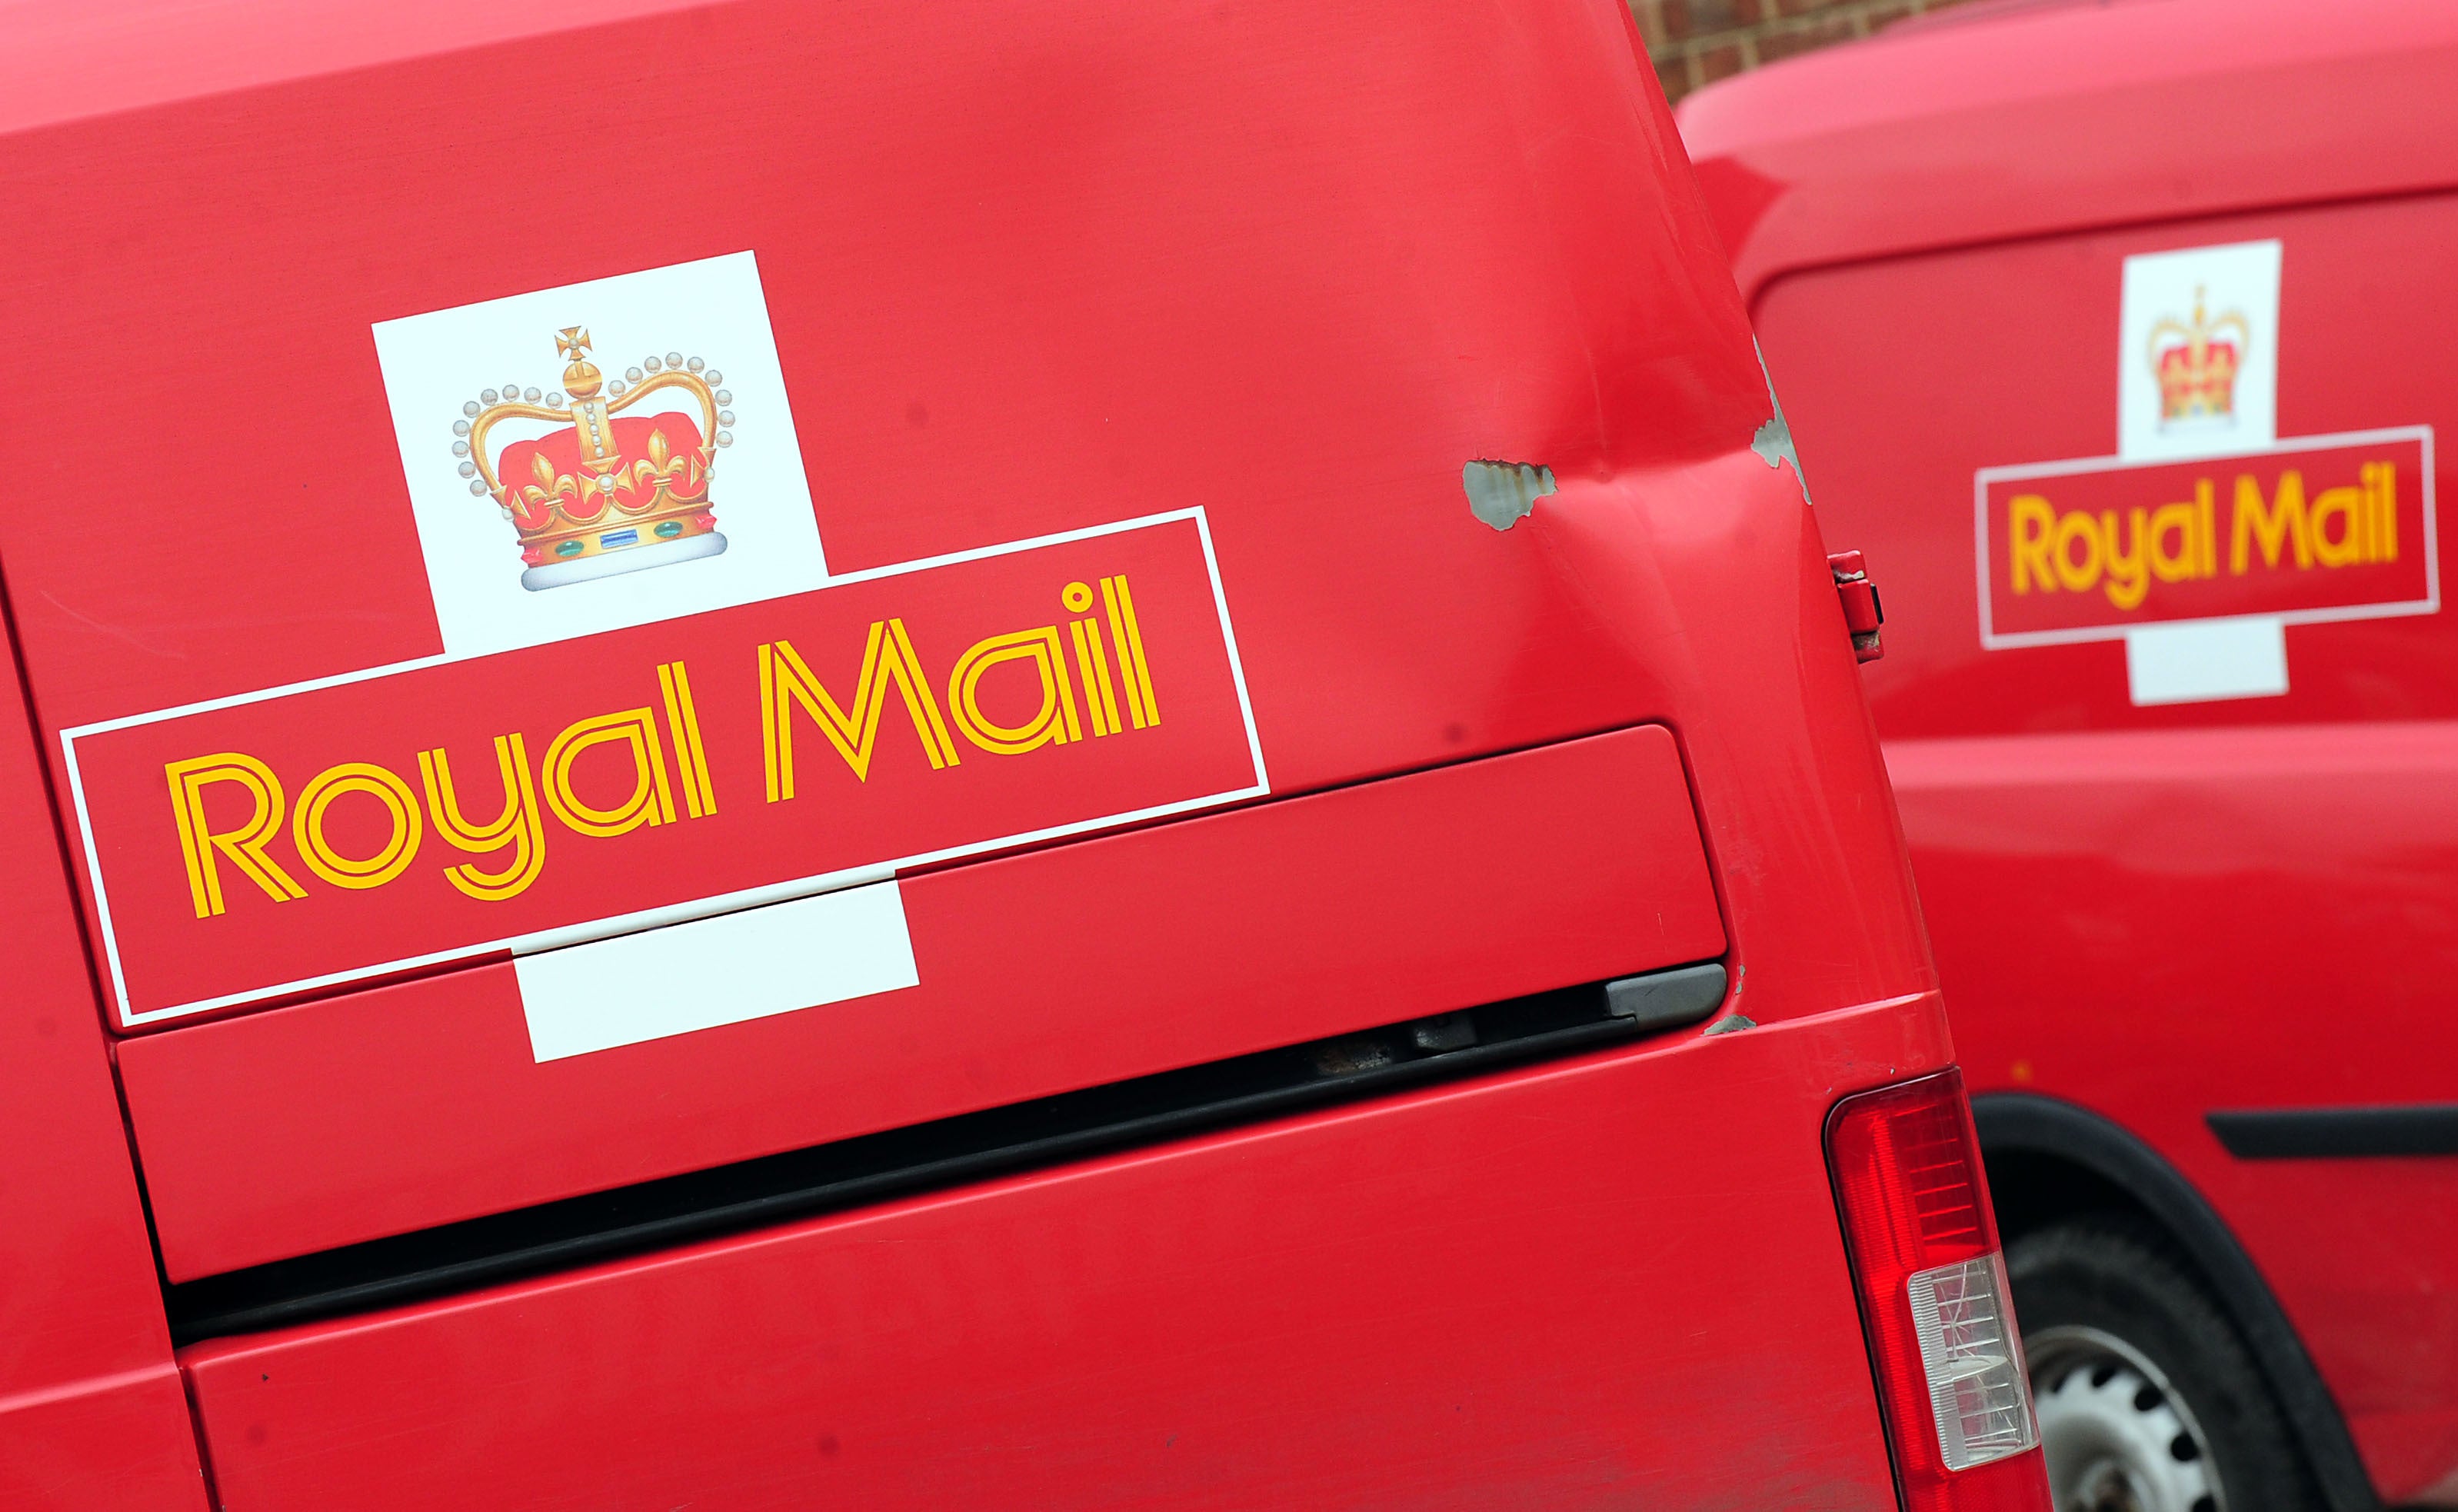 Ofcom presented two options for either cutting frequency or speed of postal deliveries